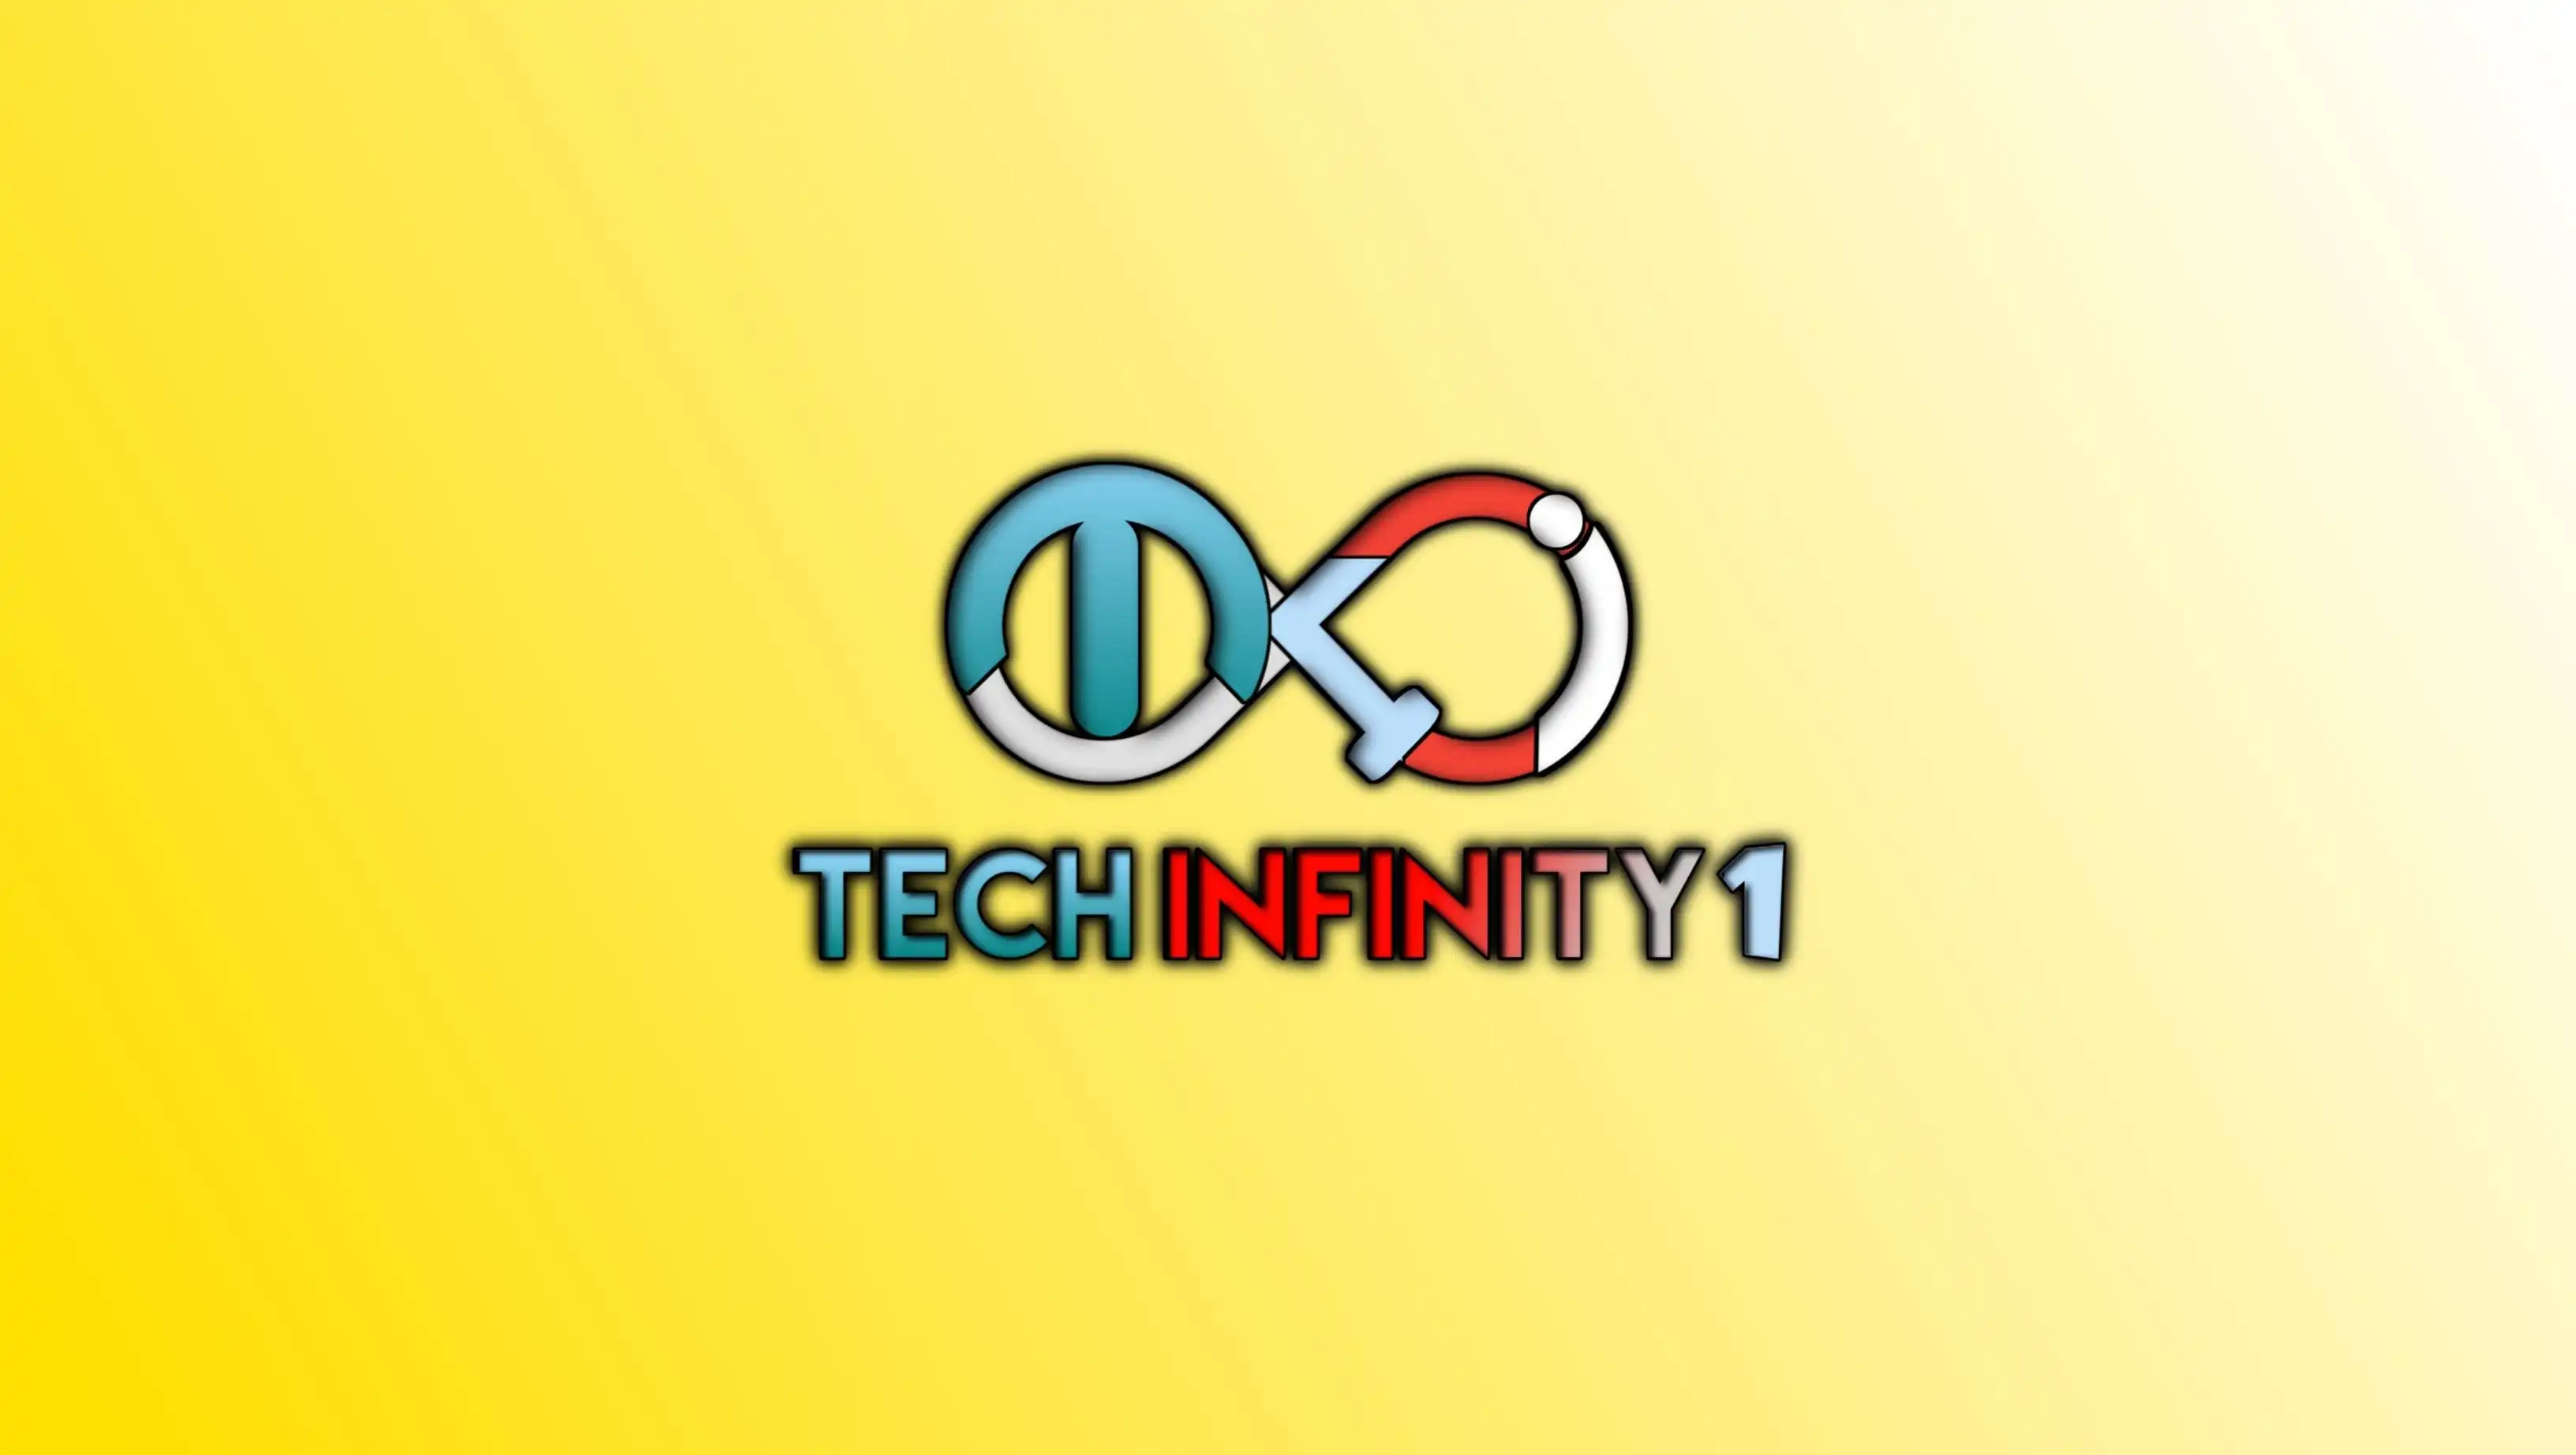 Download web tool or web app All Gcam and Confiig BY TECH INFINITY 1